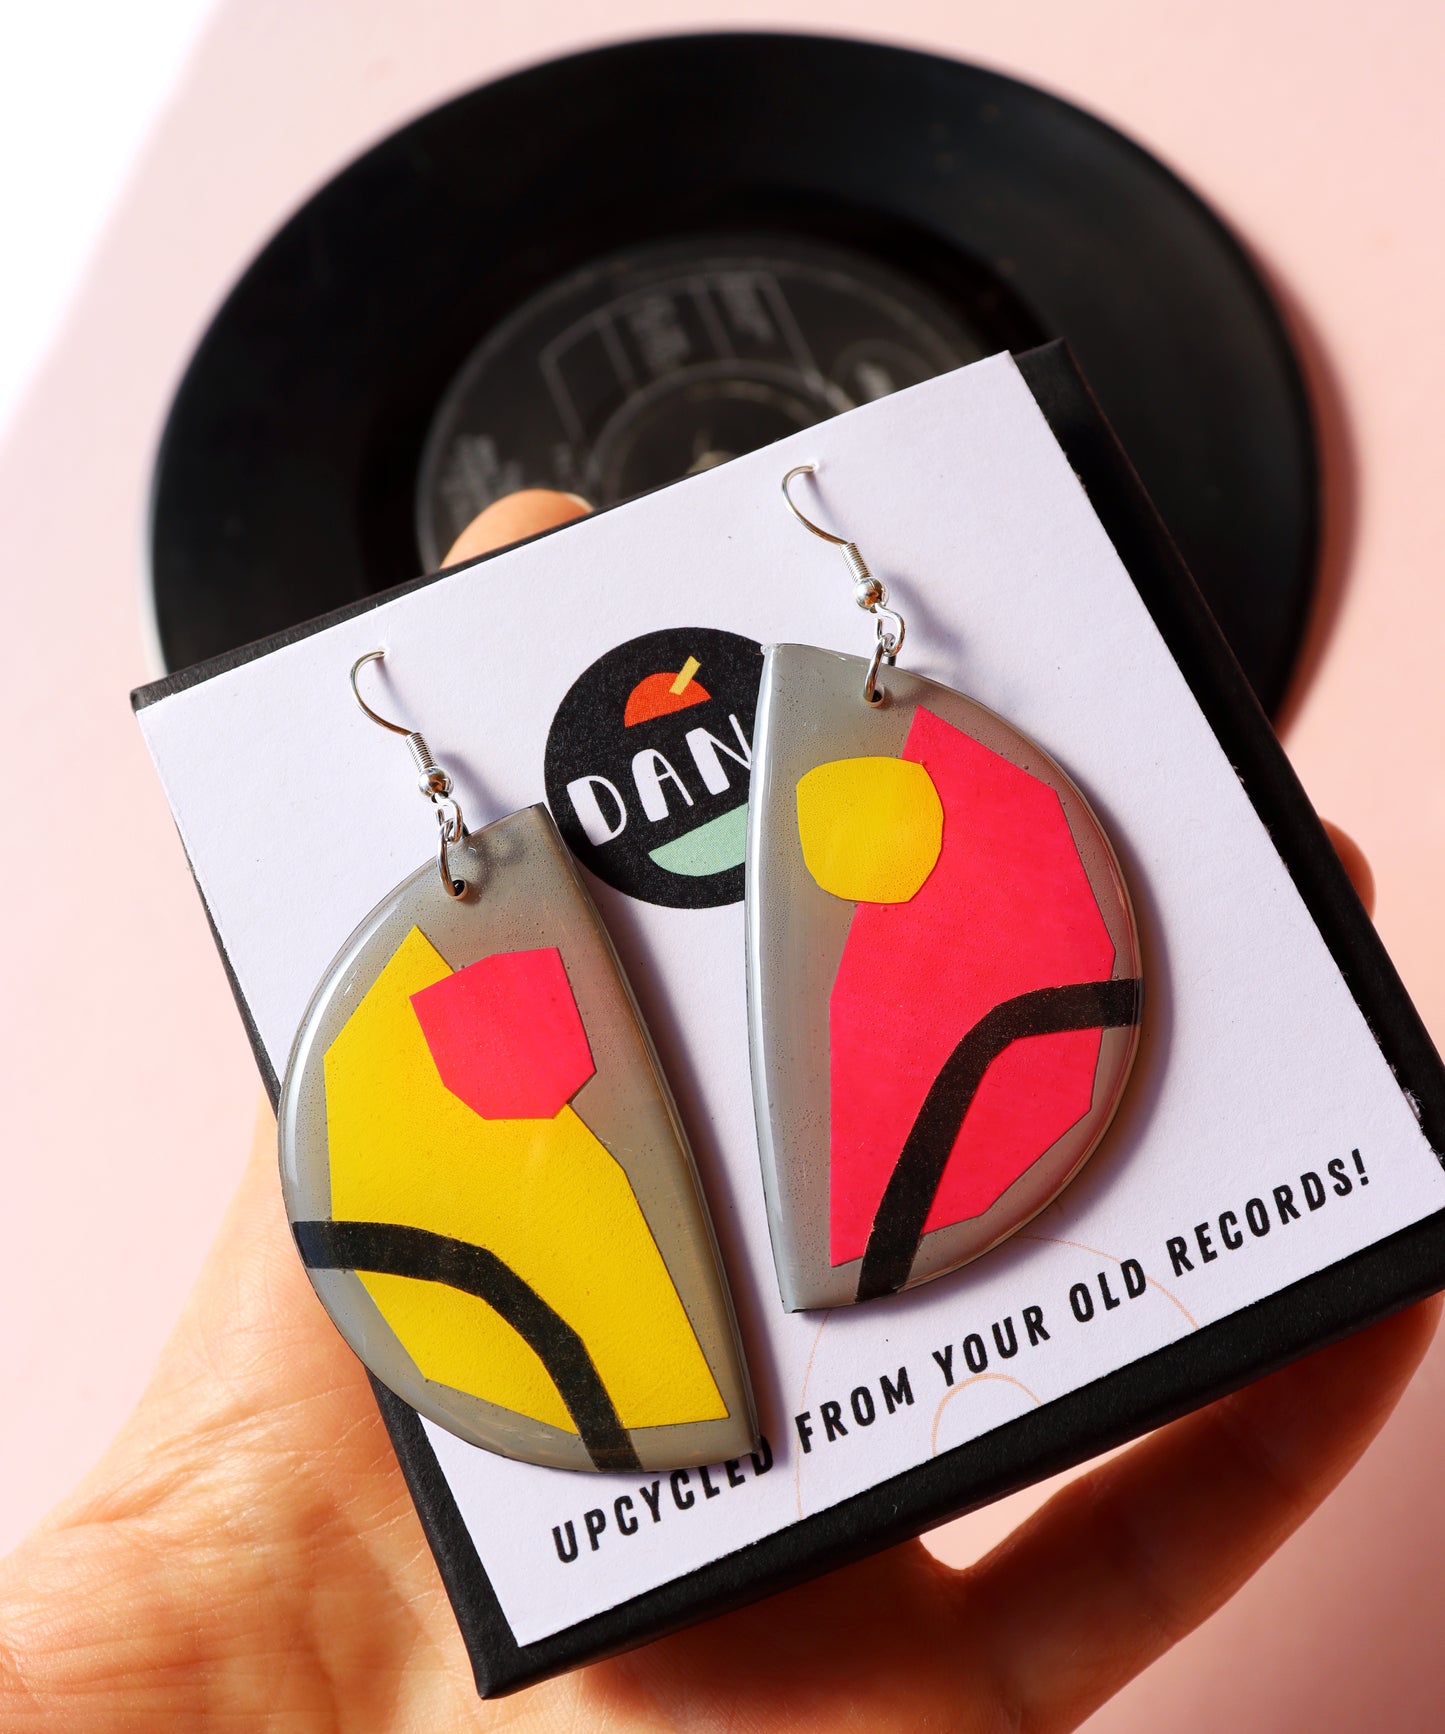 20% OFF One of a kind upcycled art earrings in hot pink, yellow, grey and black